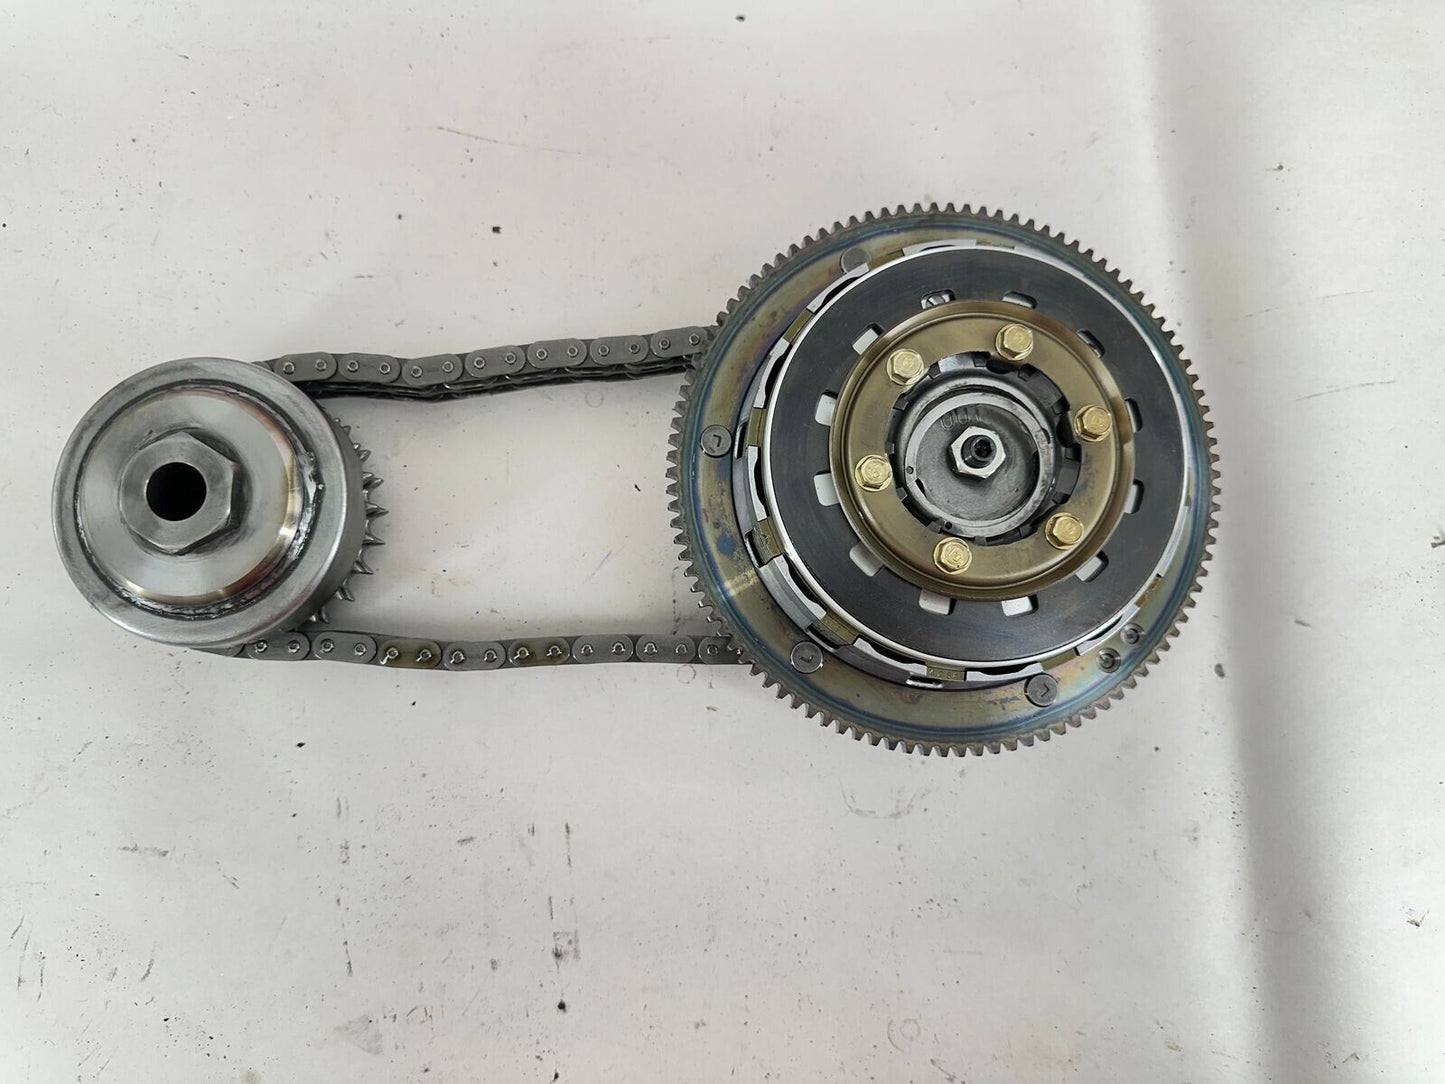 1999 HARLEY ELECTRA GLIDE Primary Clutch Chain Gears Basket